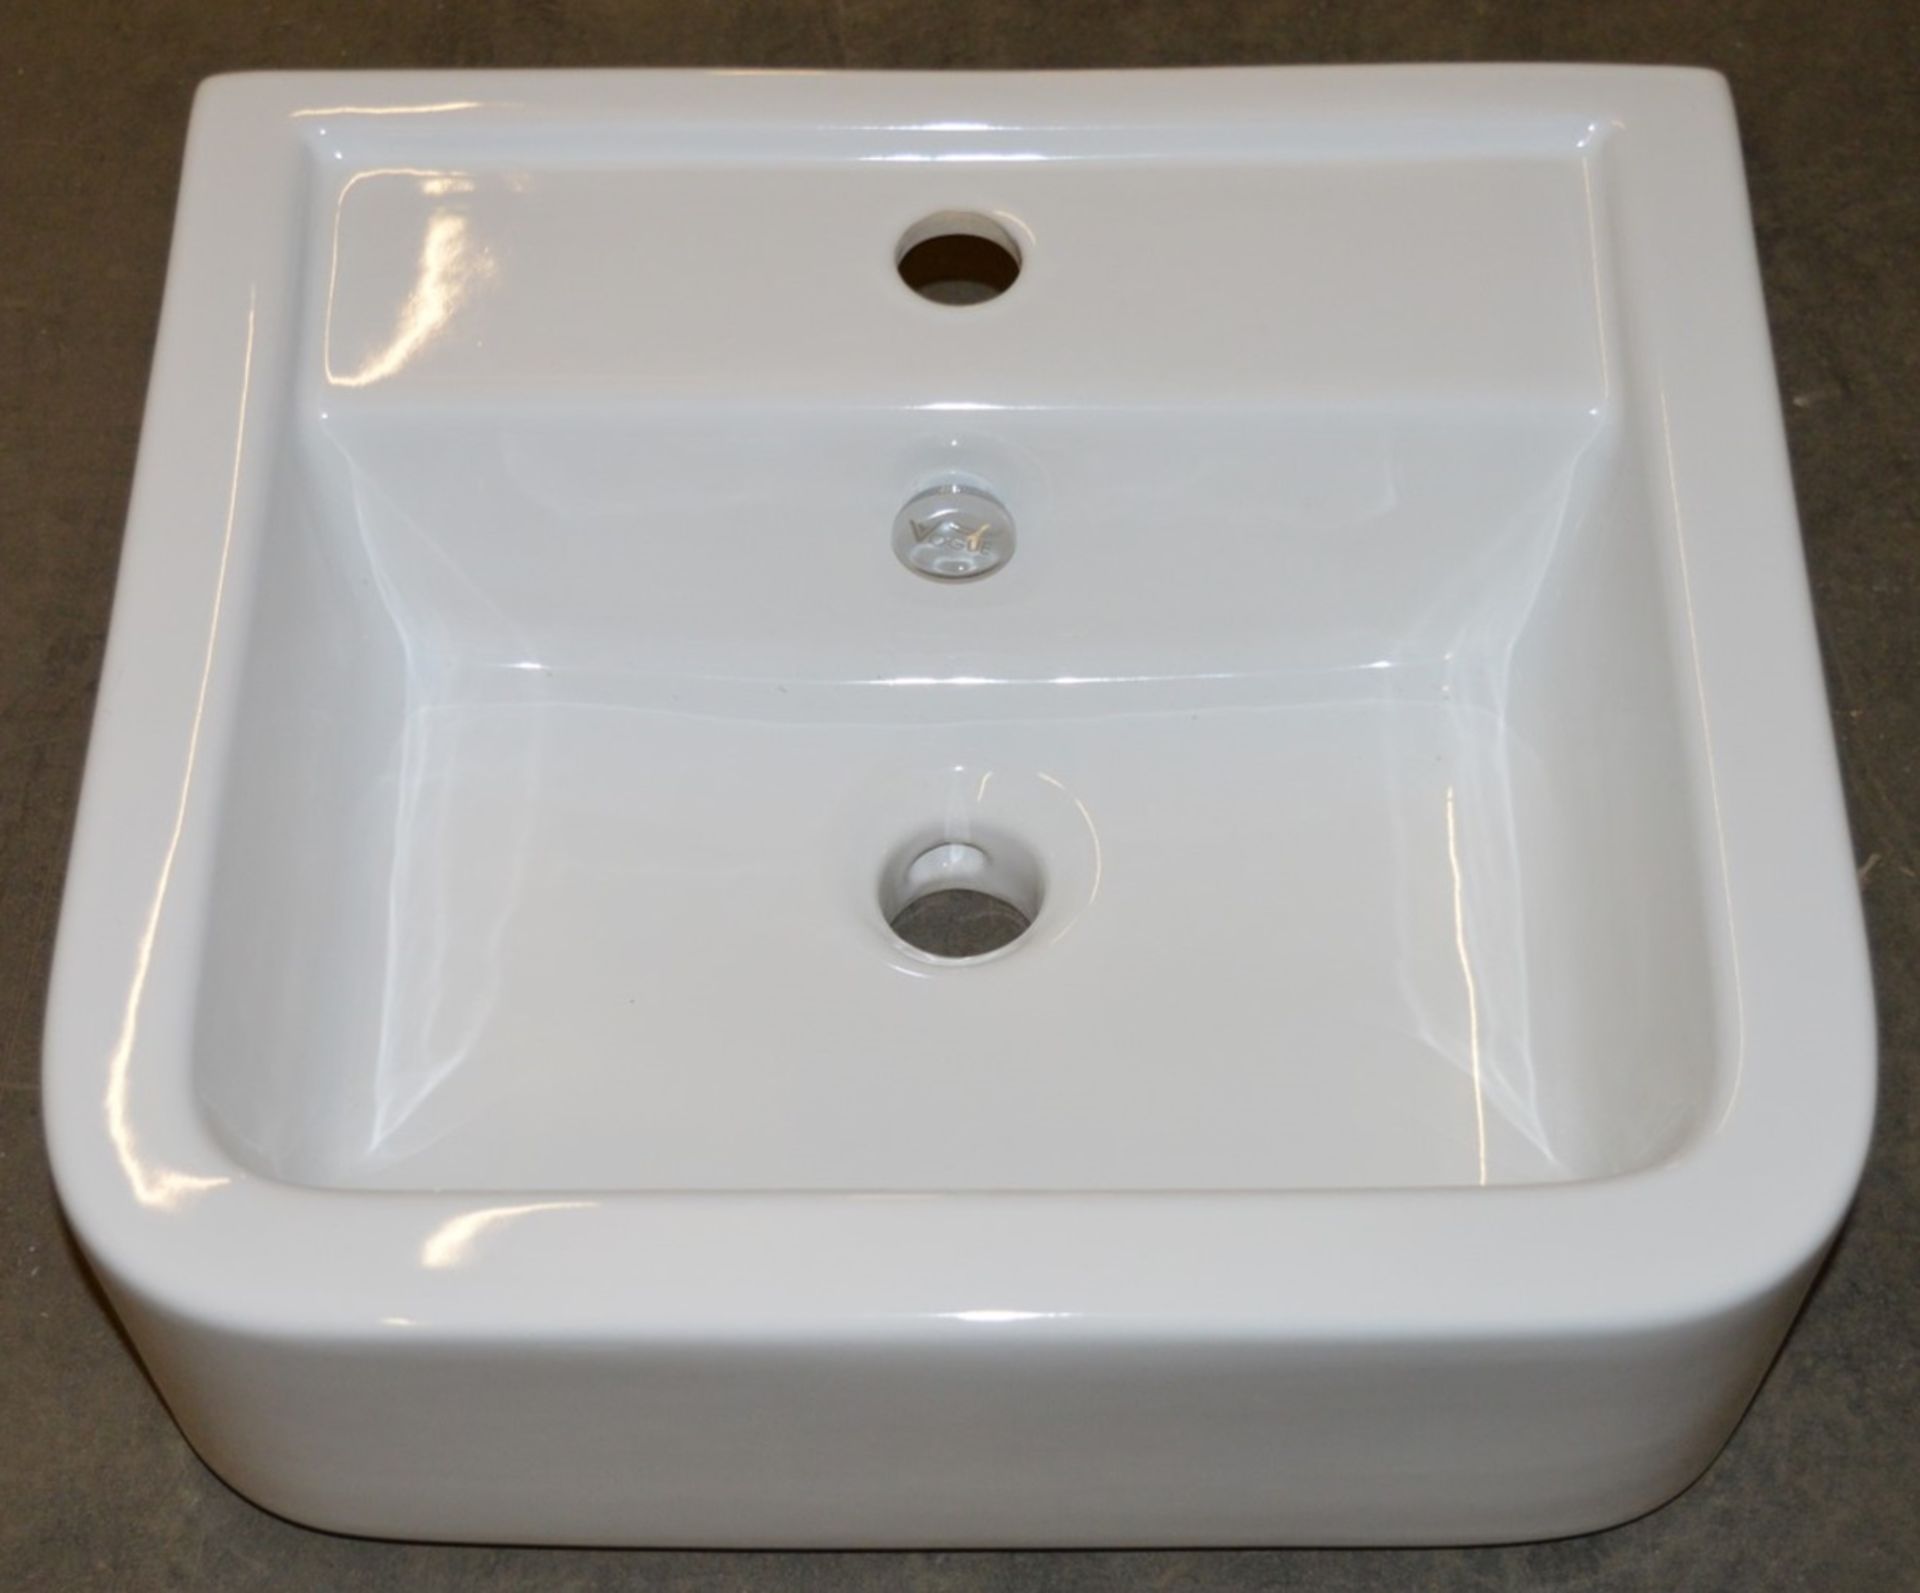 1 x Vogue Bathrooms OPTIONS Single Tap Hole SEMI RECESSED SINK BASIN - 450mm Width - Brand New Boxed - Image 2 of 4